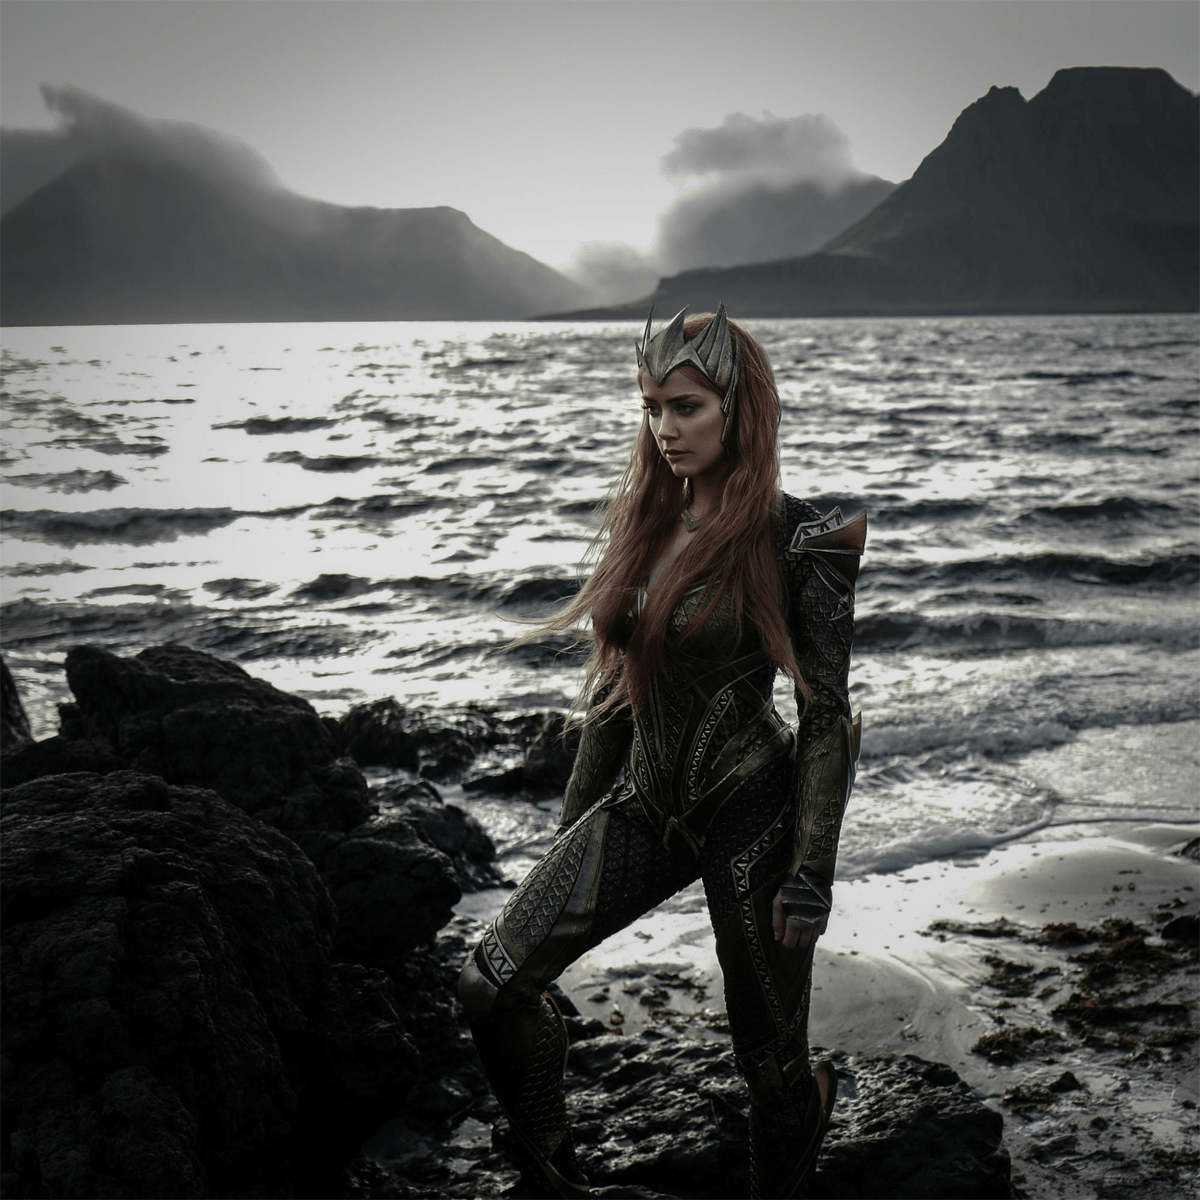 Our First Look At Justice League’s Mera, Queen Of Atlantis